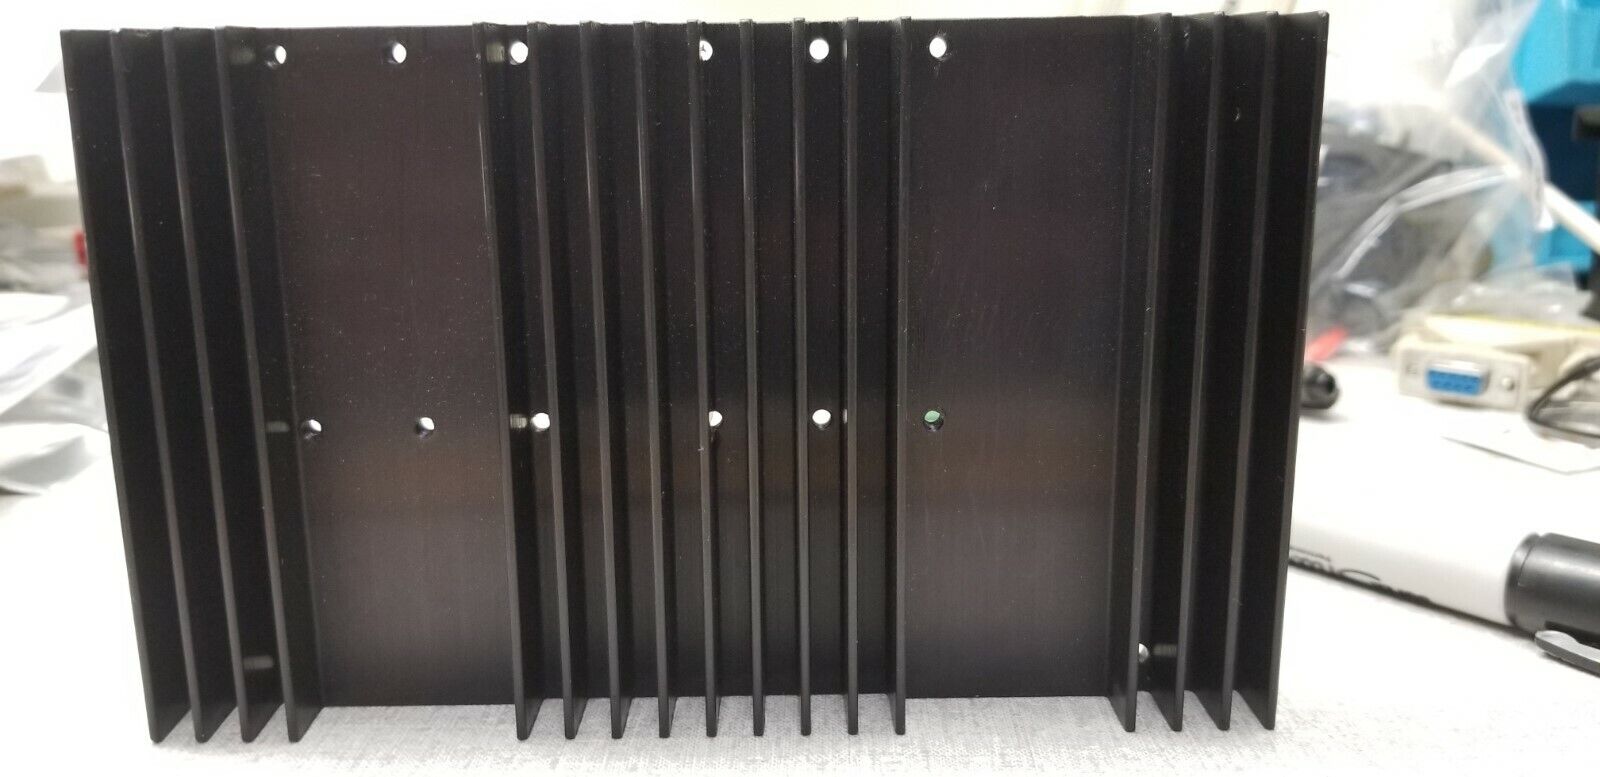 ABB Extruded Challenge the lowest price of Japan Anodized Aluminum depot HeatSink 6.5